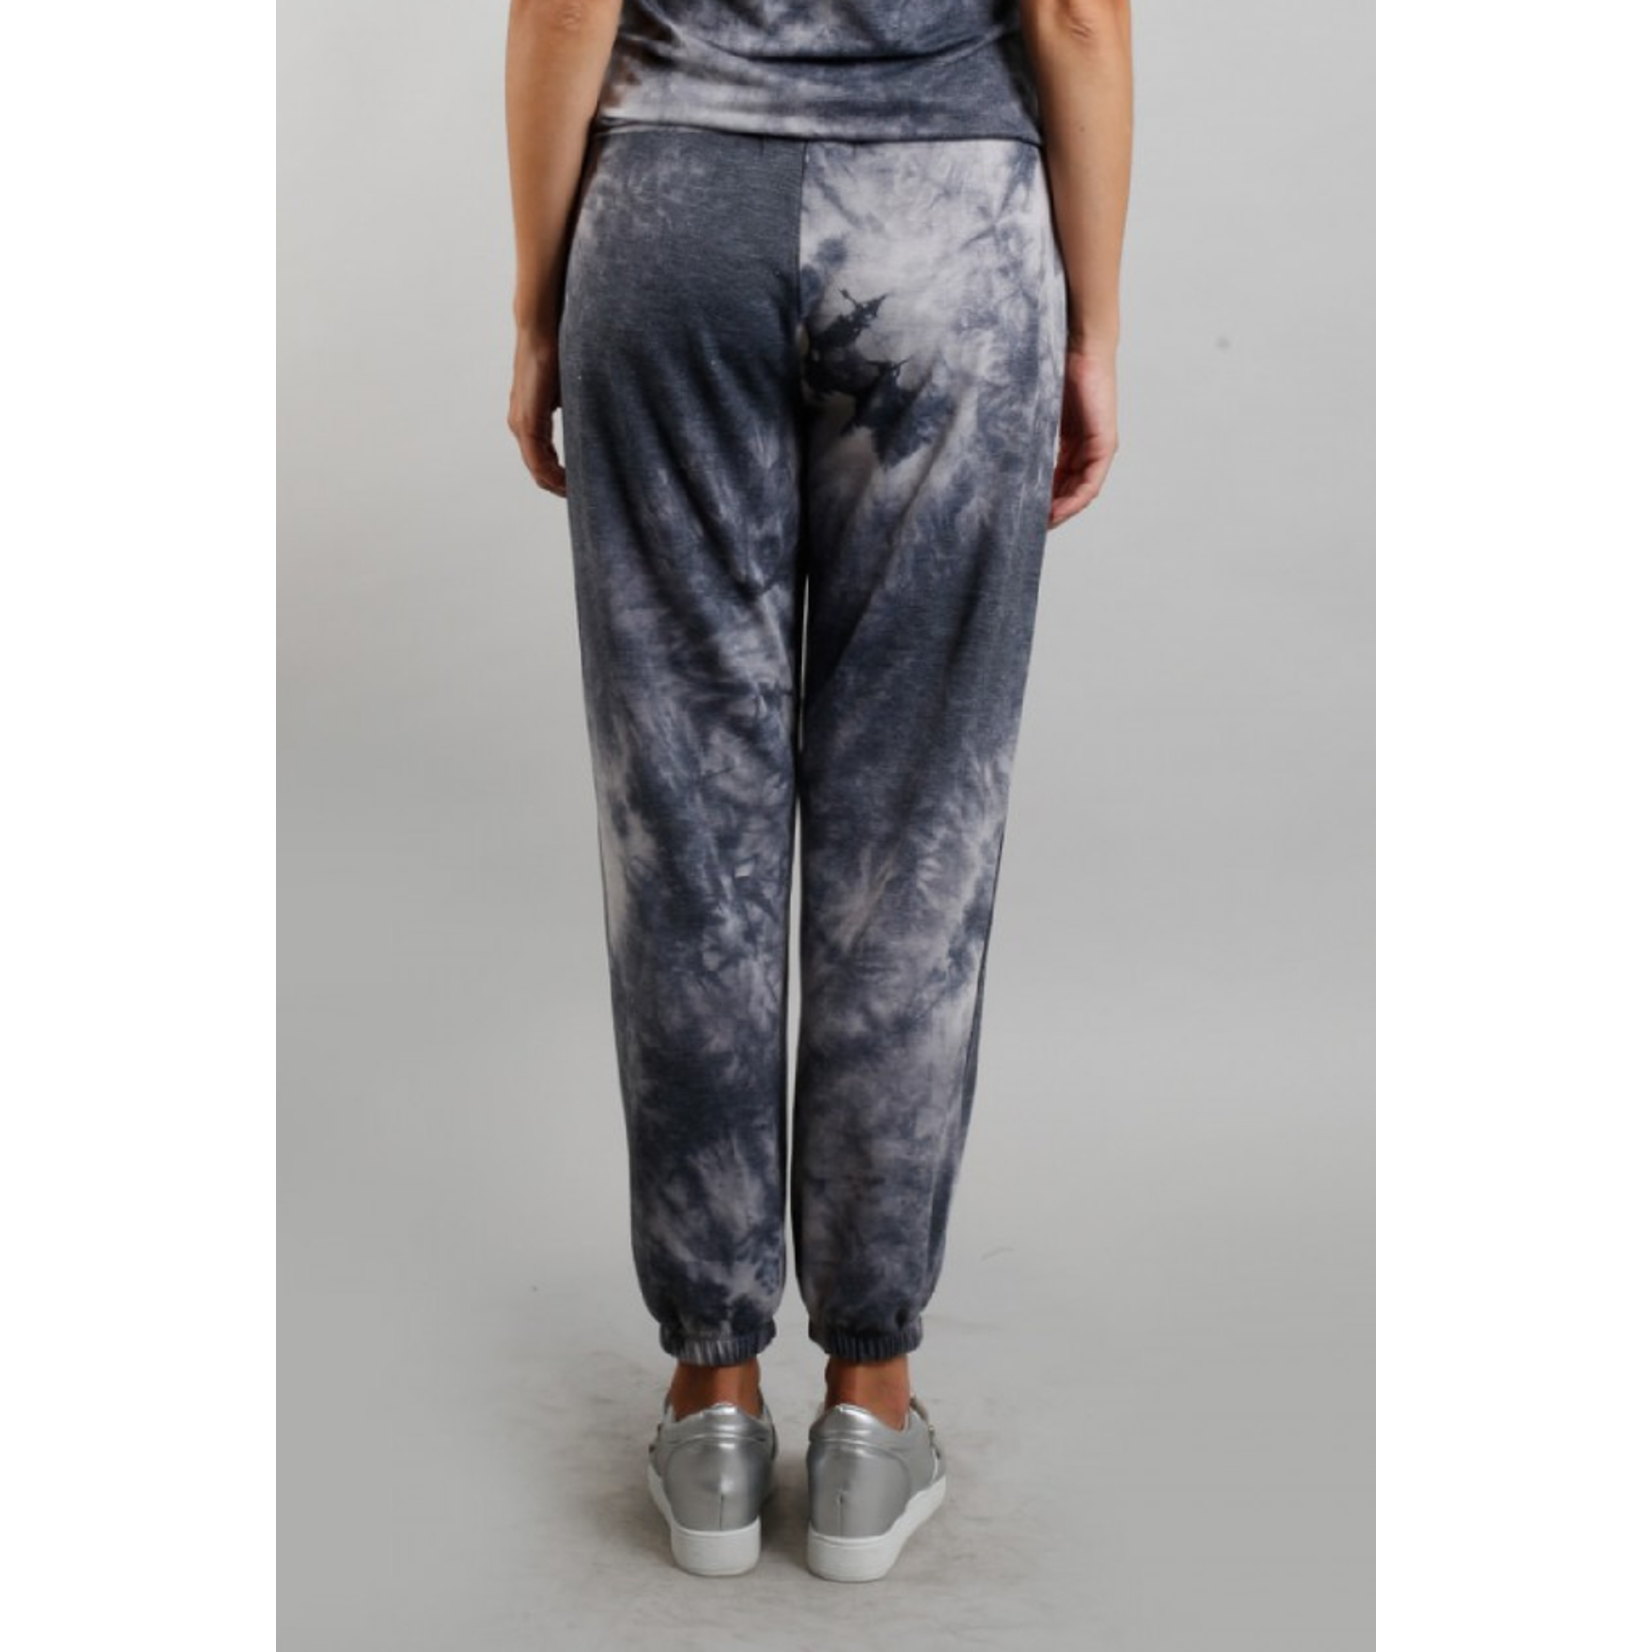 Coin 1804 French Terry Tie Dye Jogger